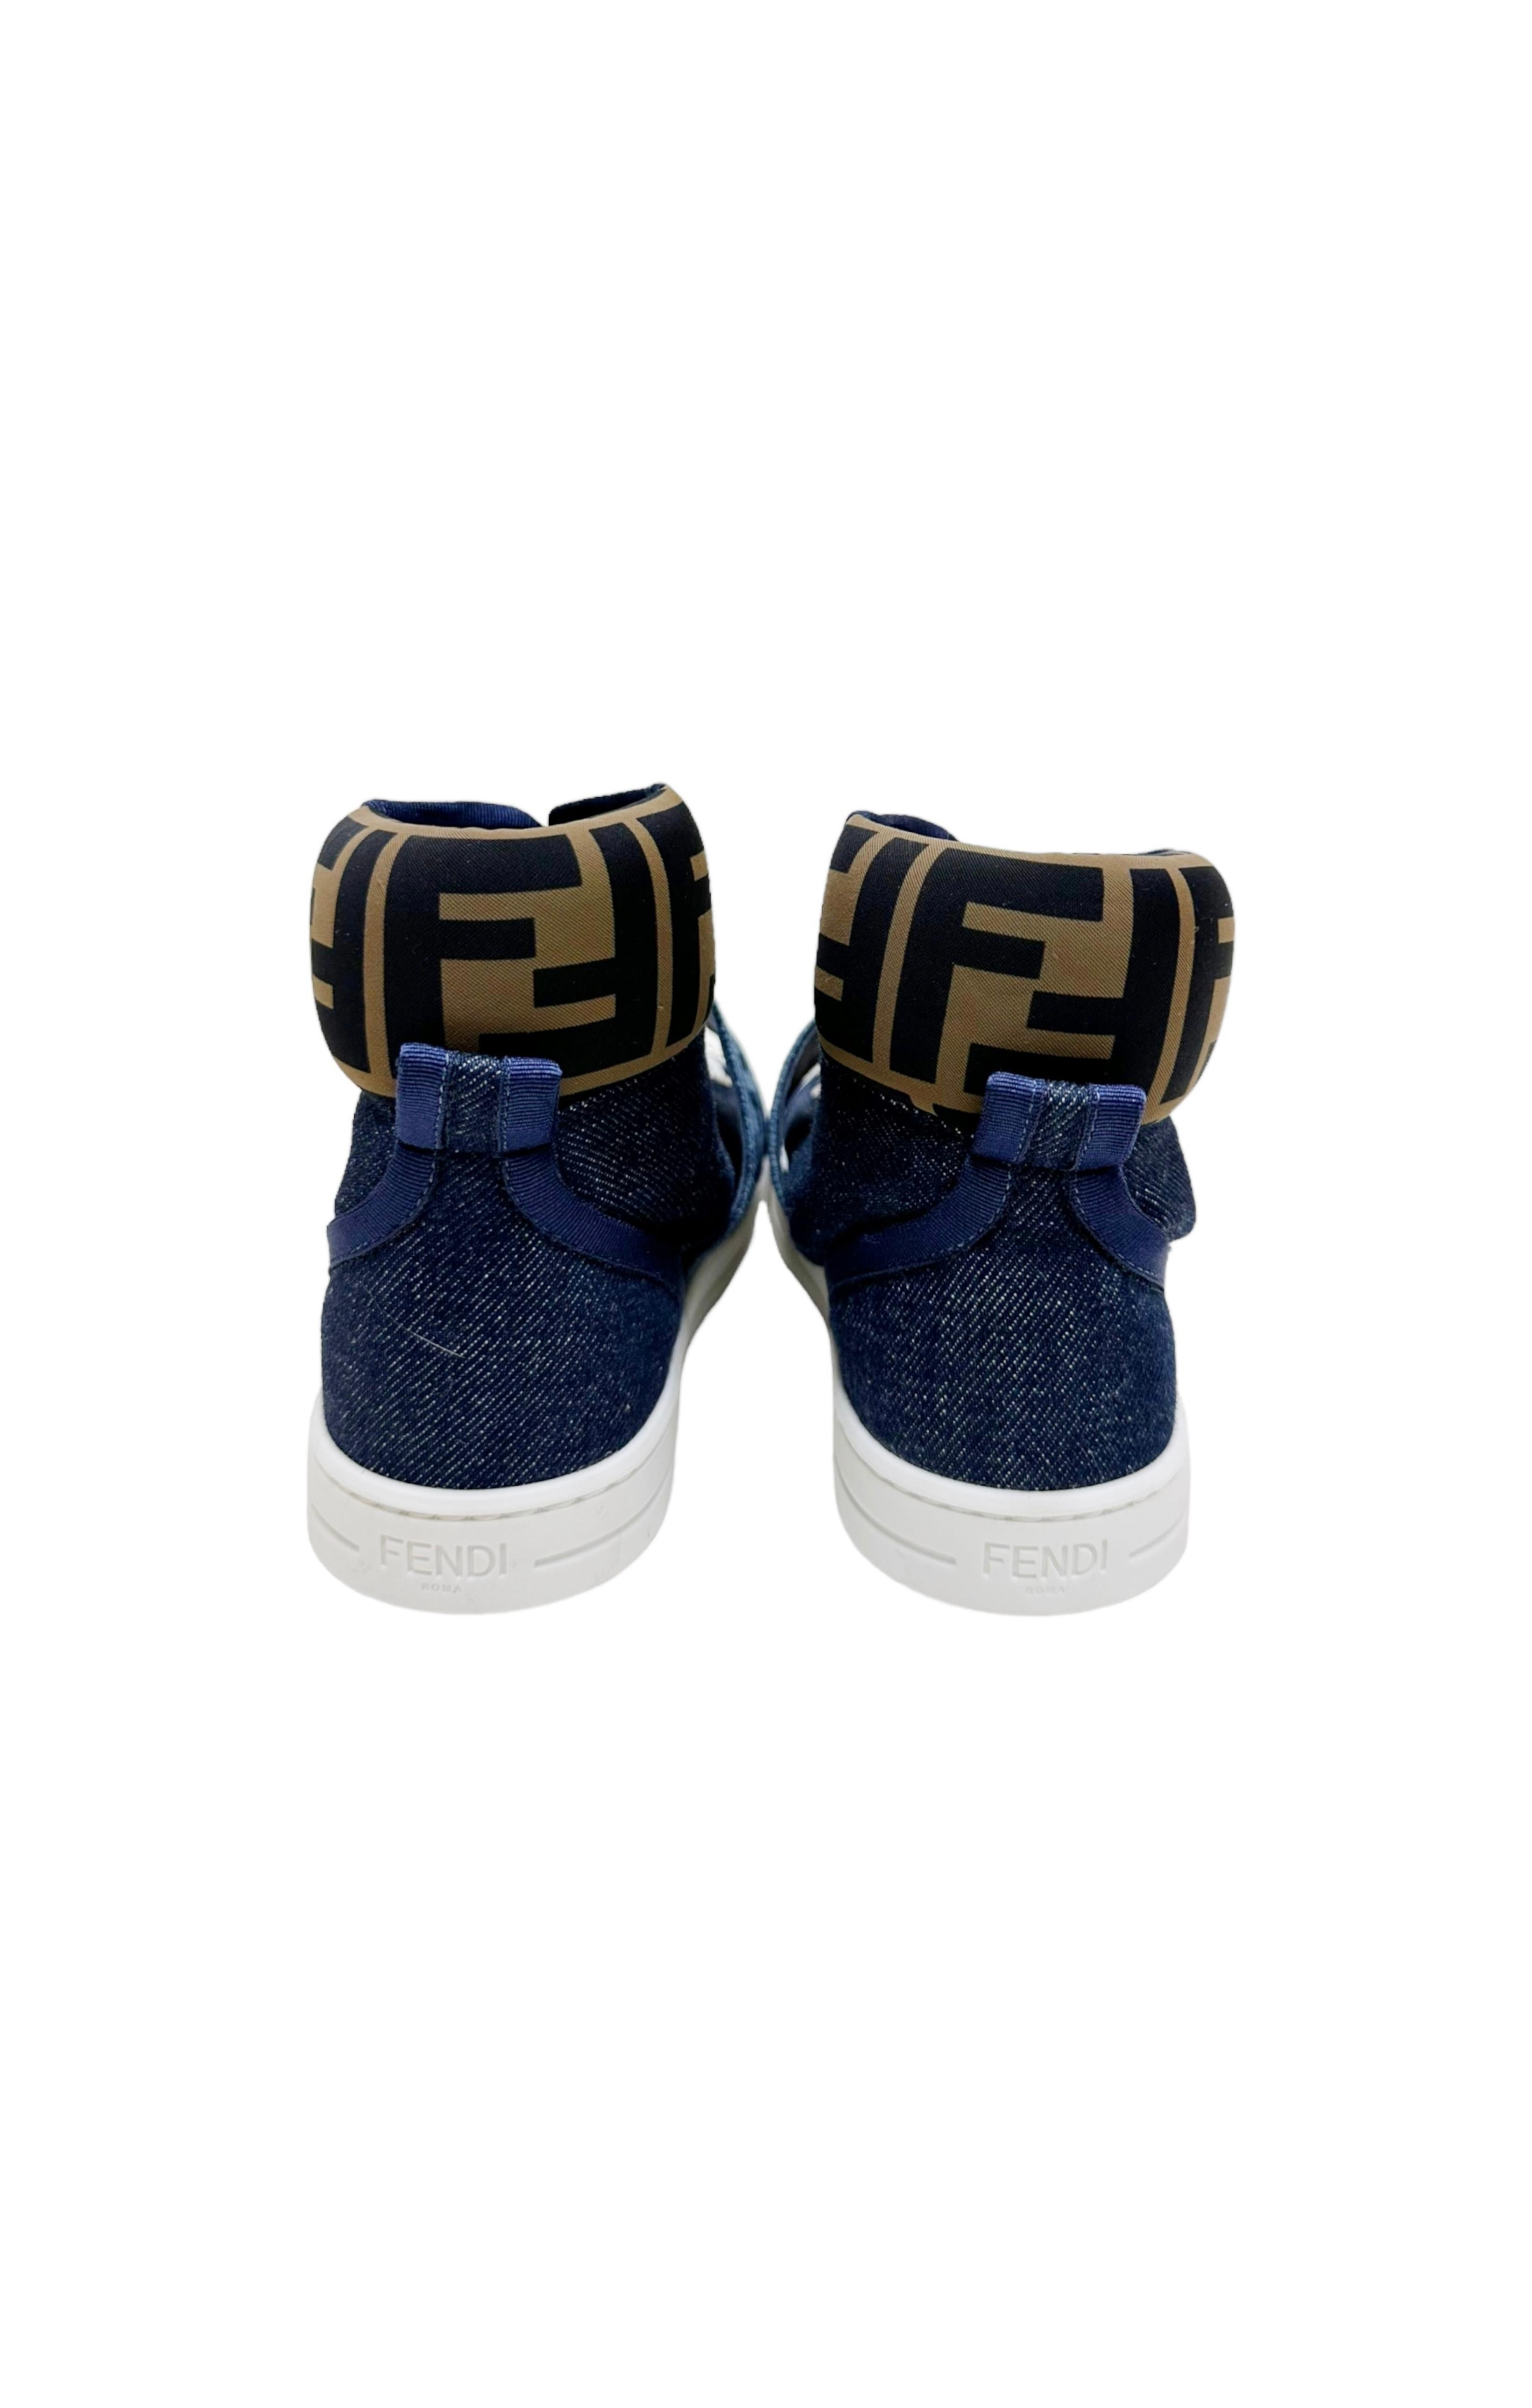 FENDI (RARE) Sneakers Size: No size tags, fit like Toddler US 13.5